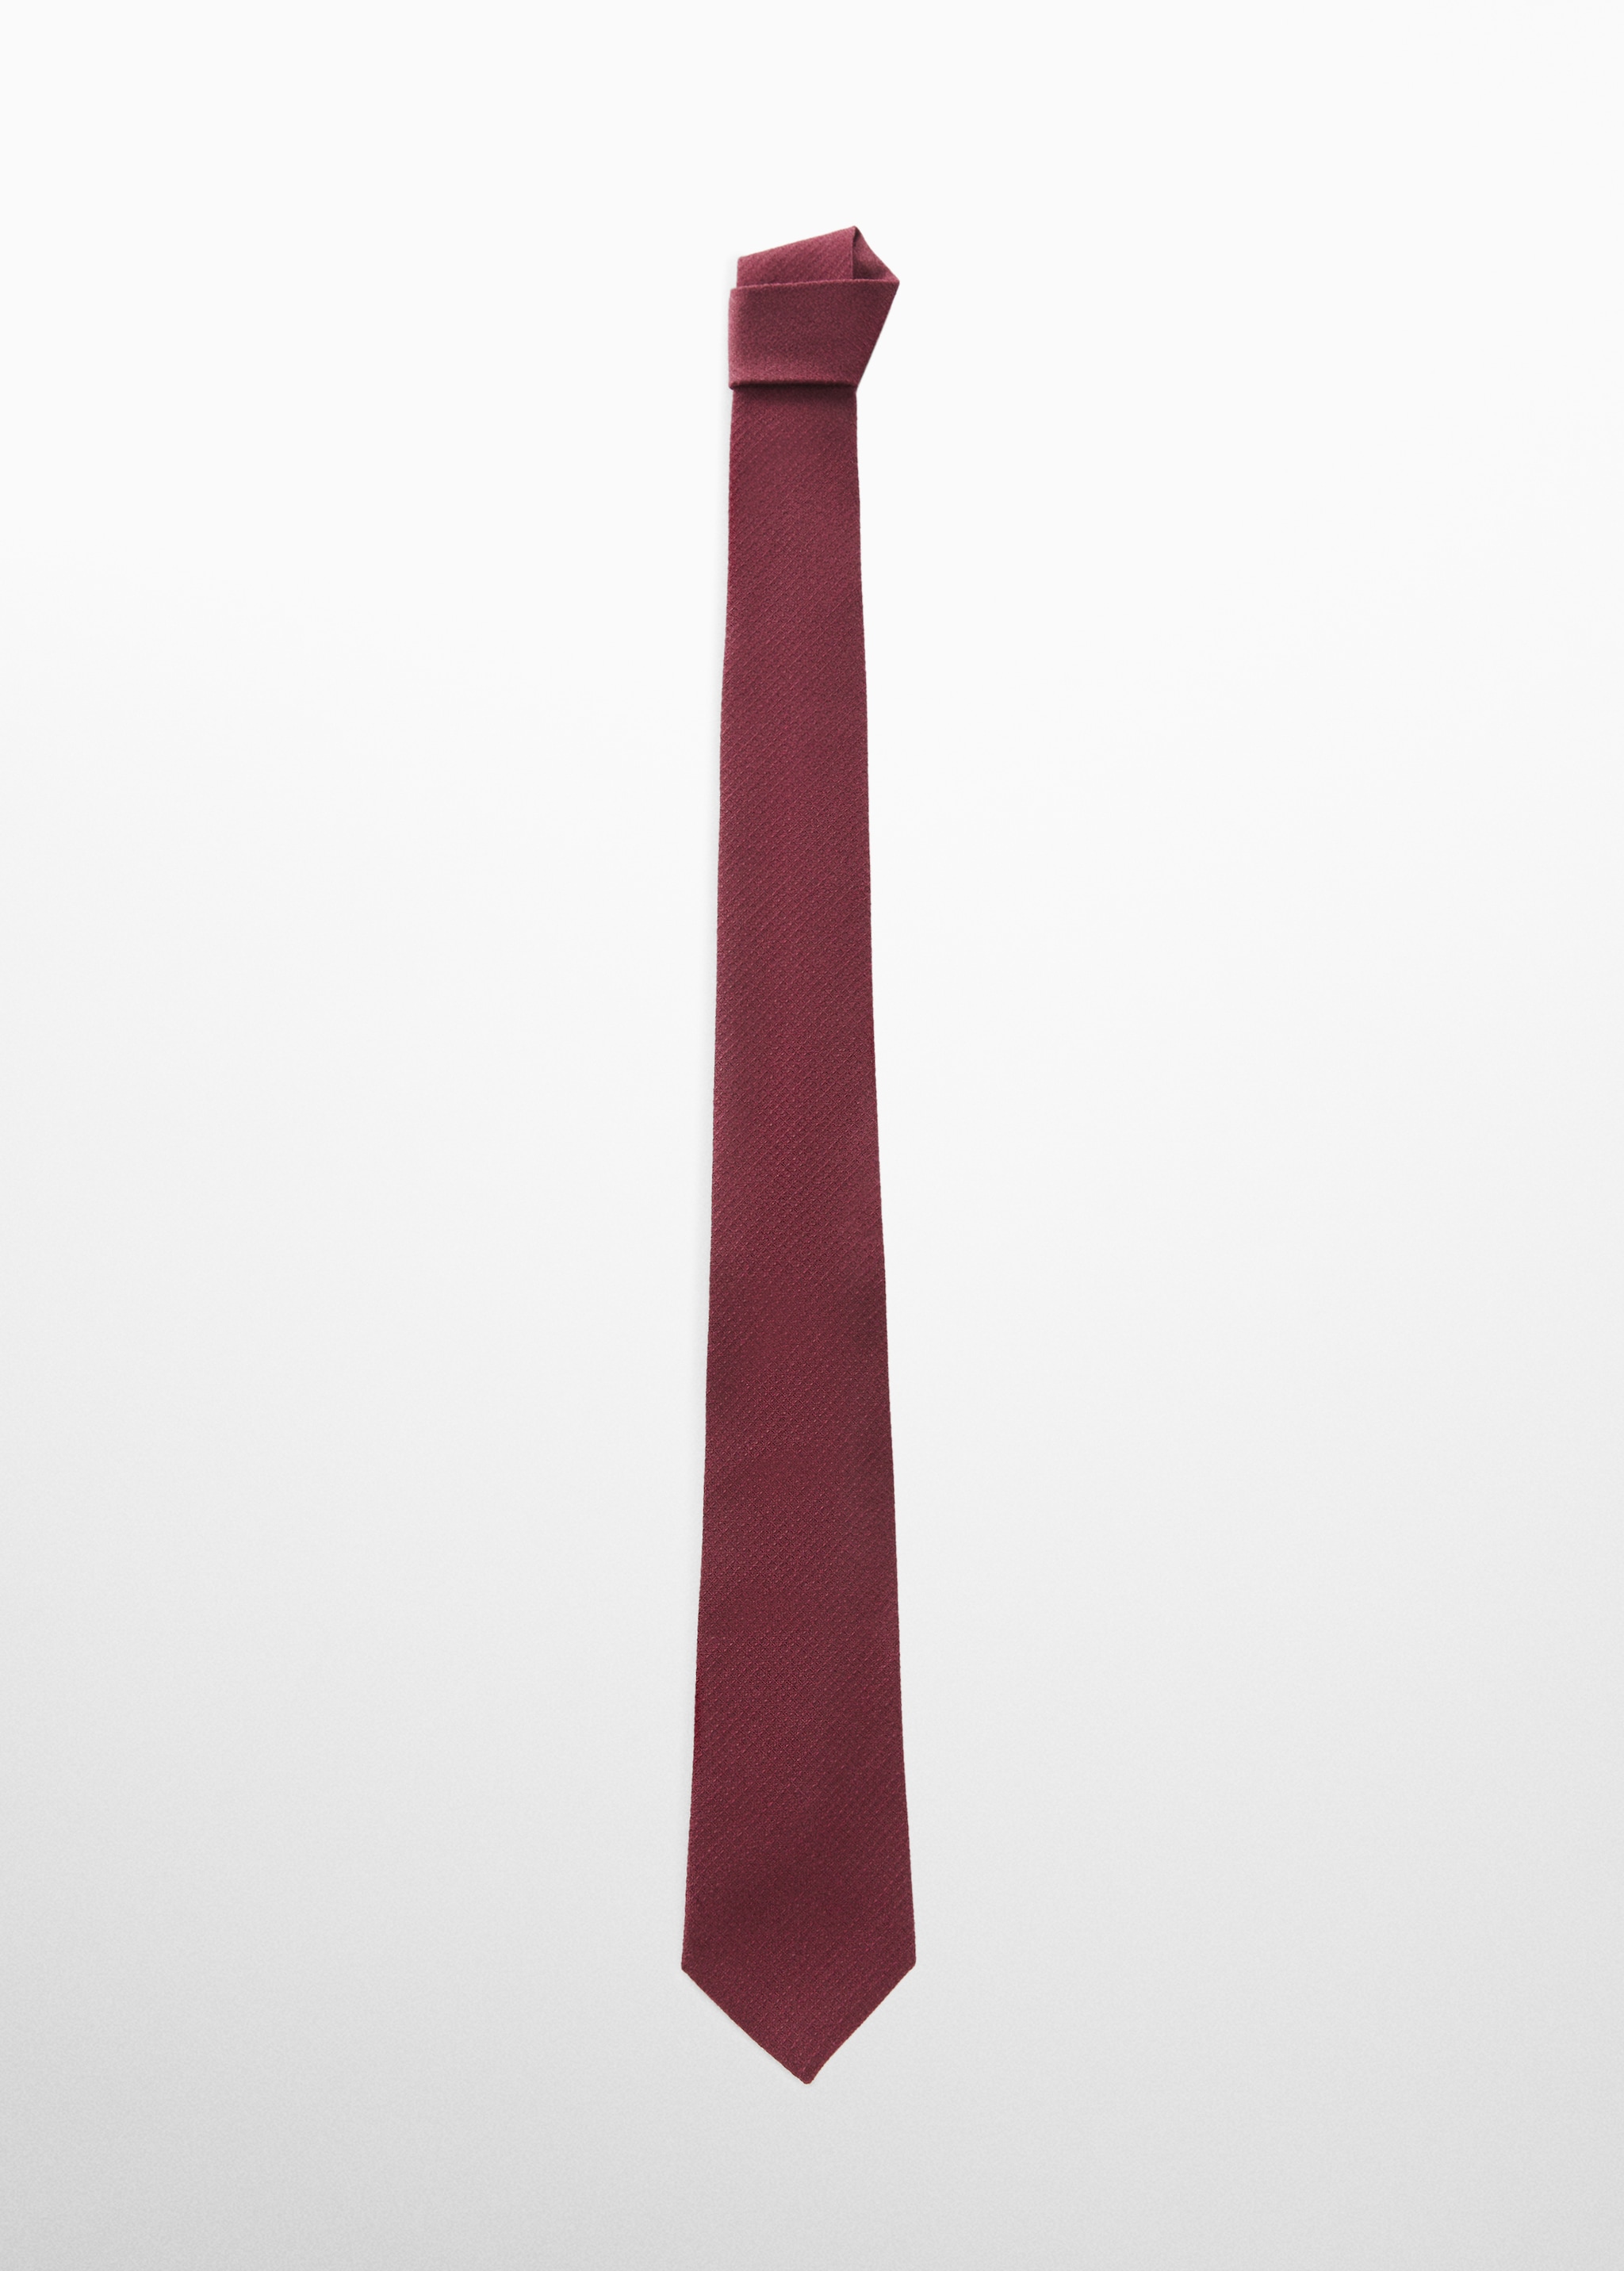 Structured cotton tie - Article without model